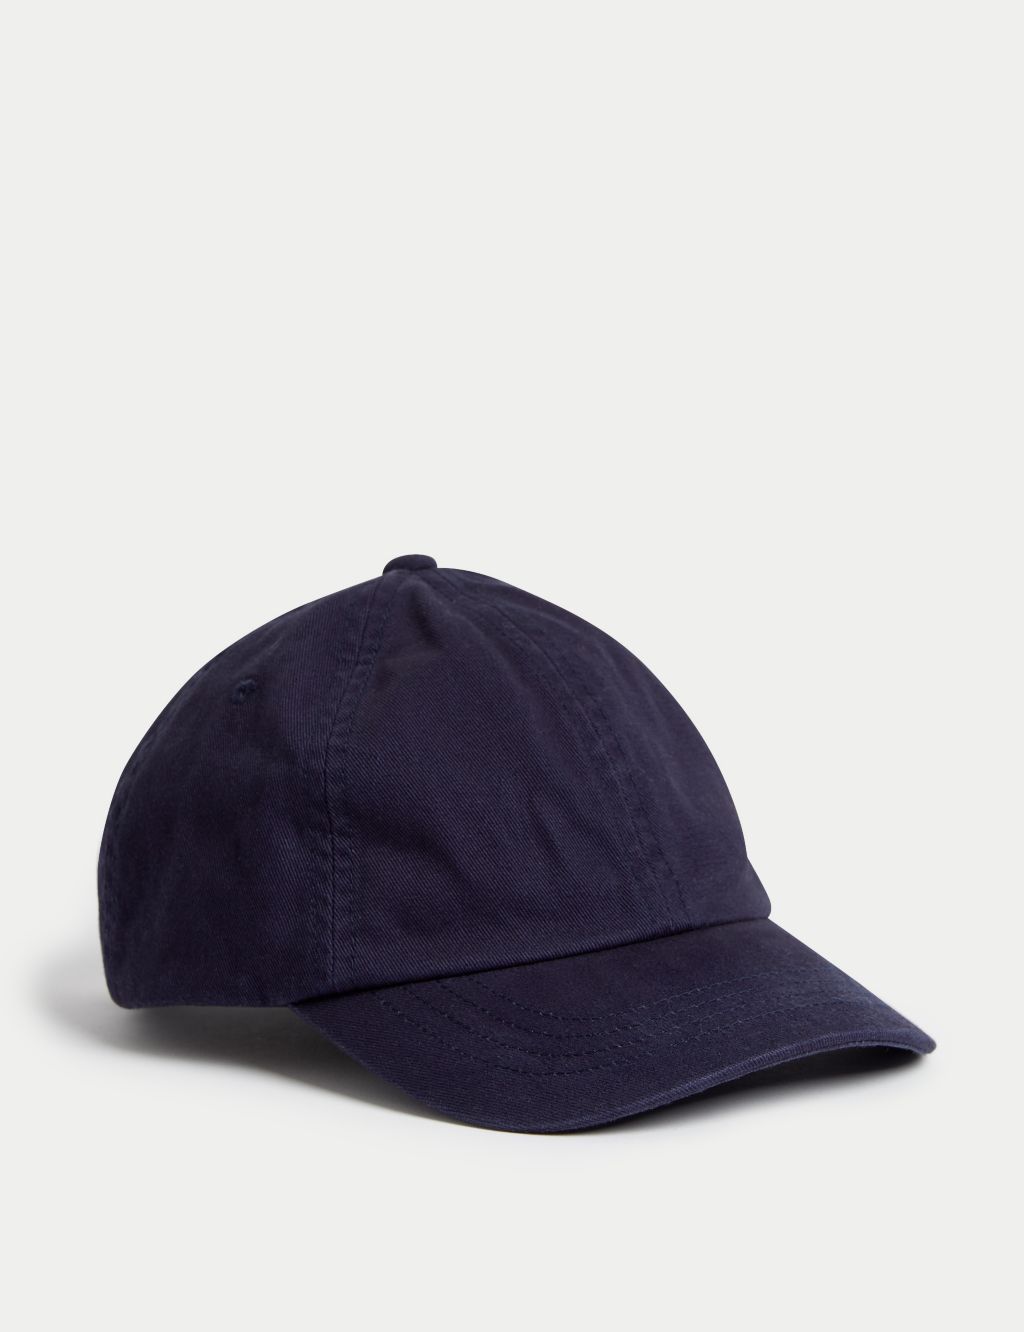 Buy Navy Blue Caps & Hats for Boys by MATCHITT Online